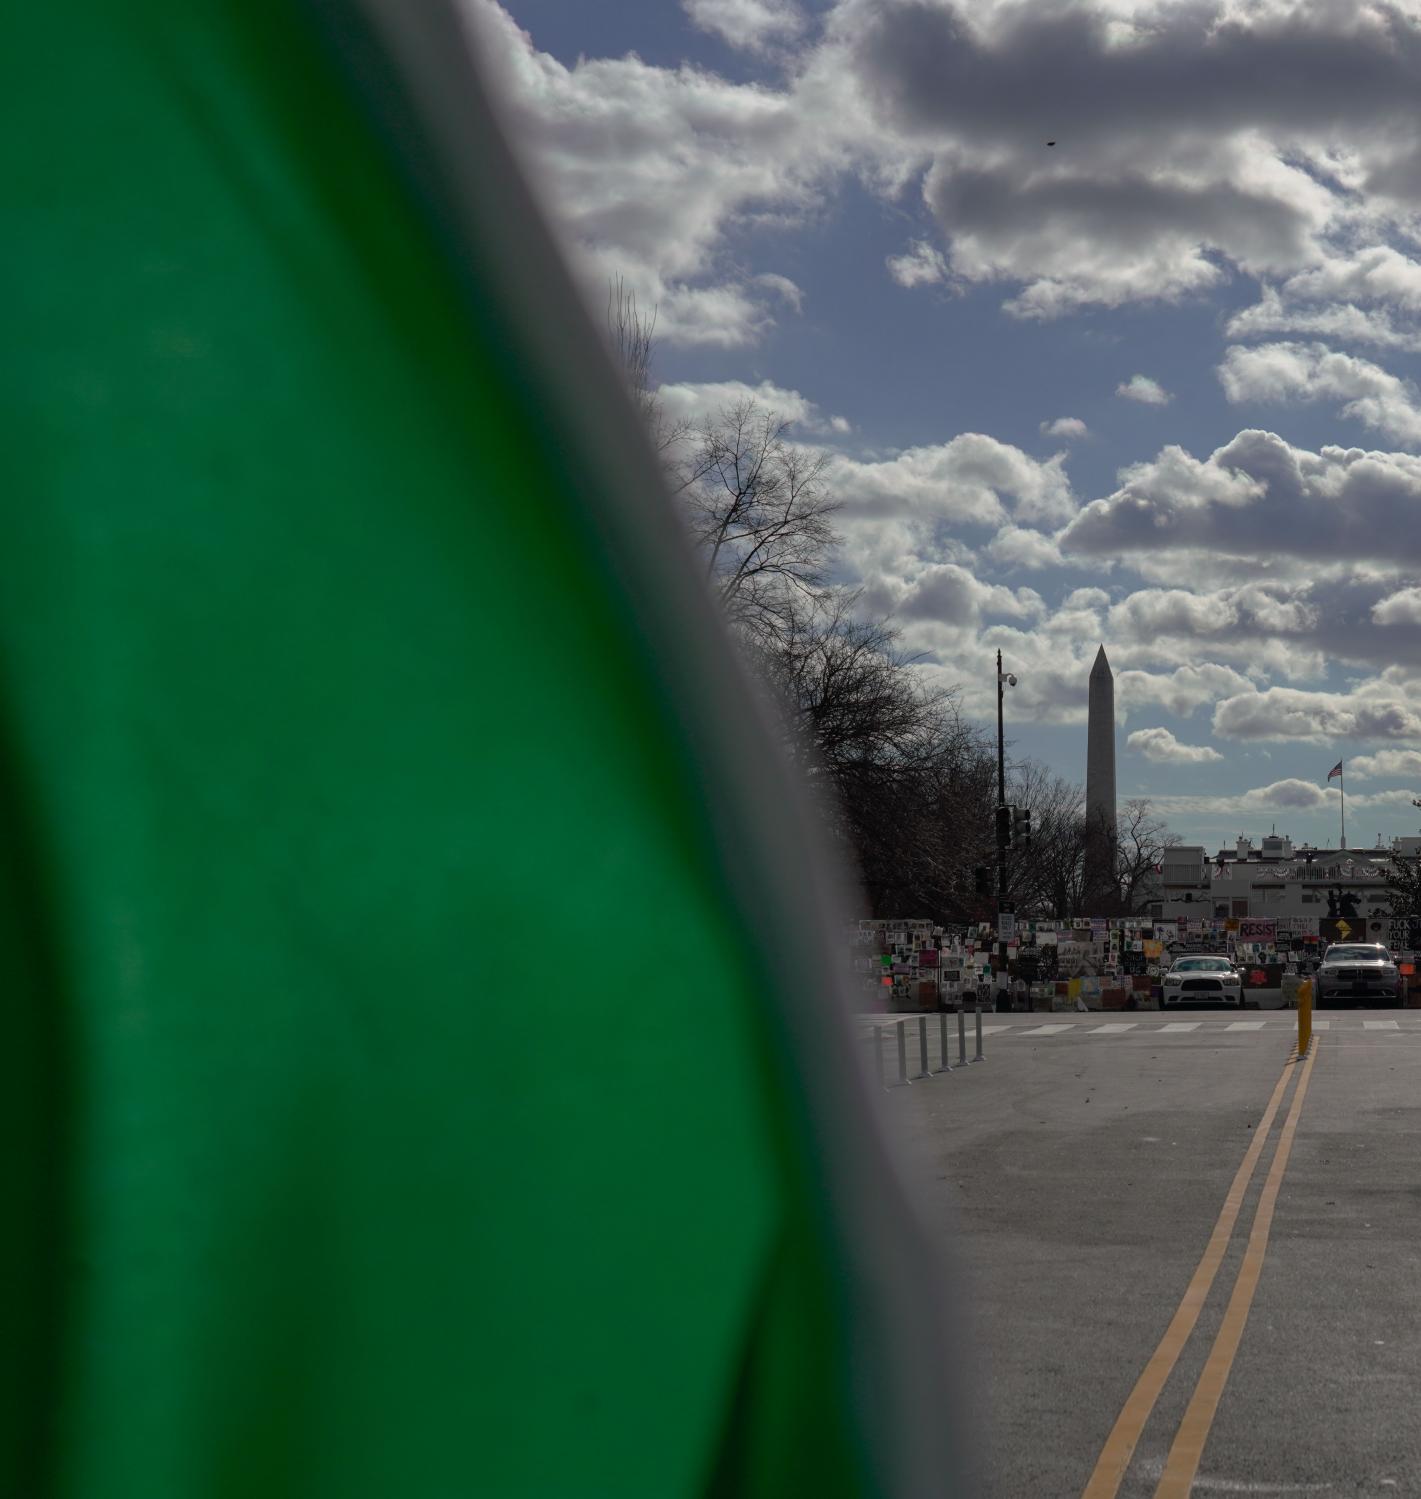 Occupied - A Back Lives Matter flag waves near the White House on...